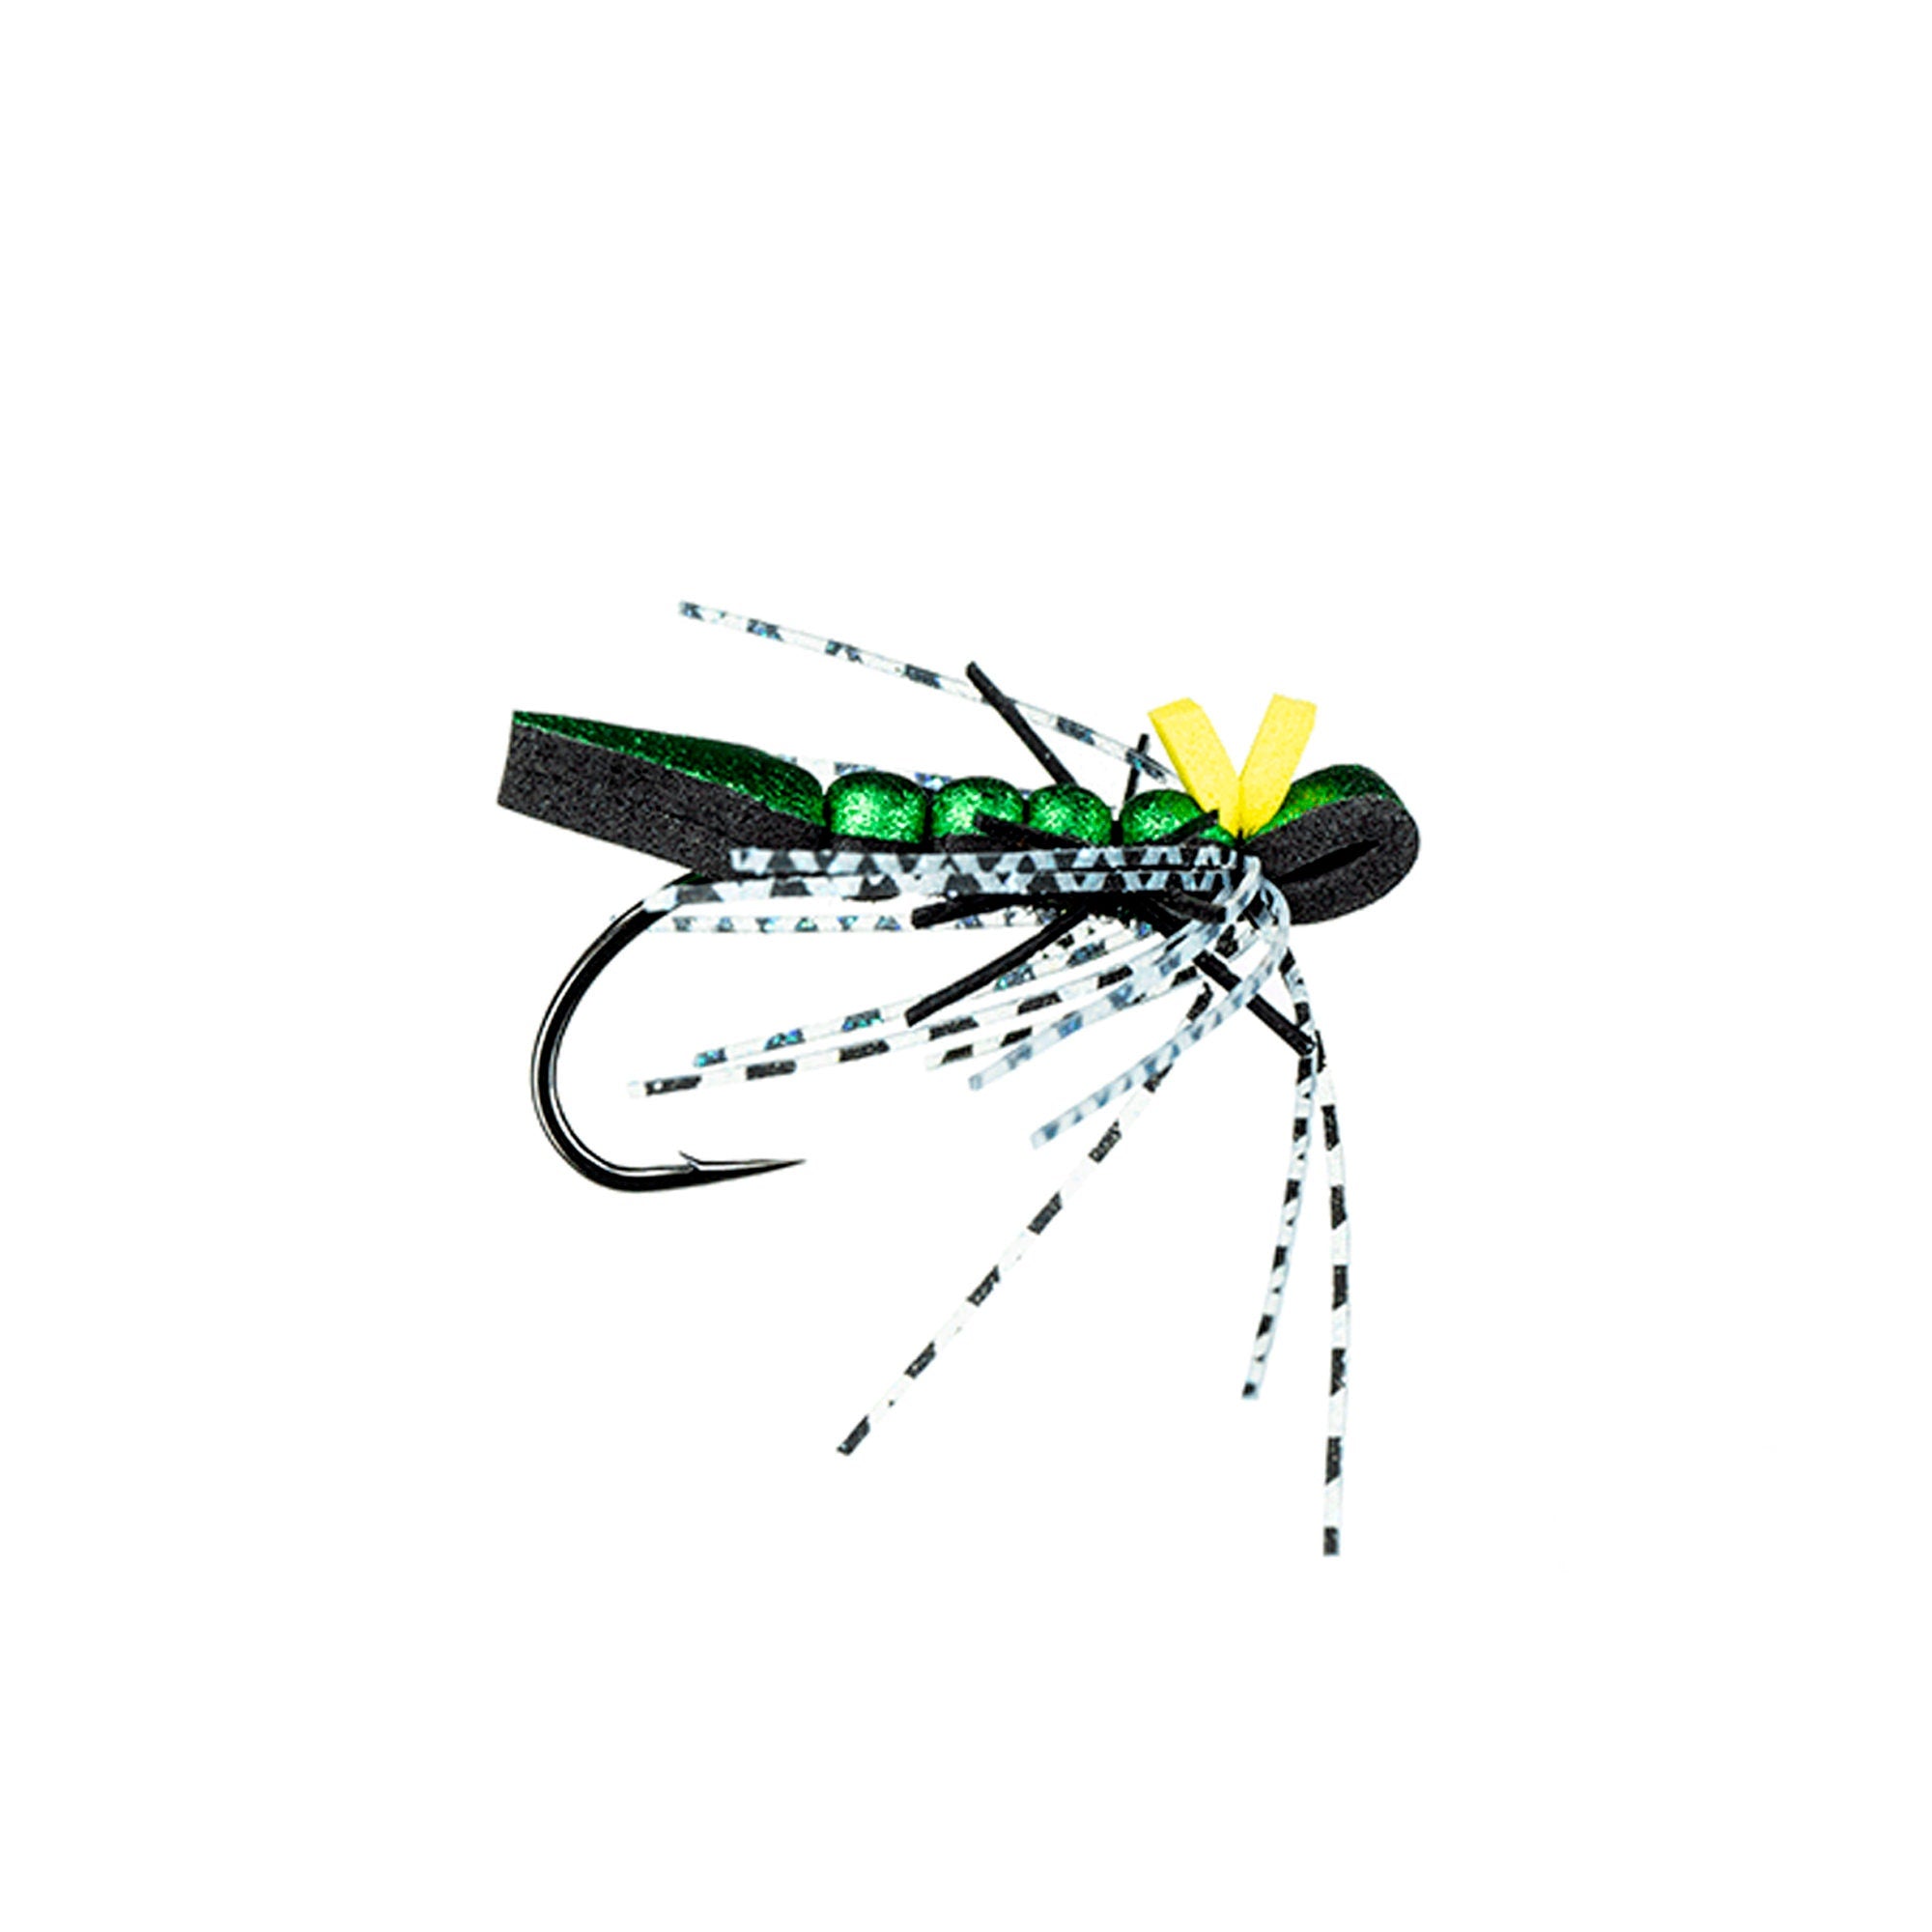 Wiggly Damsel Dragonfly Fishing Lure